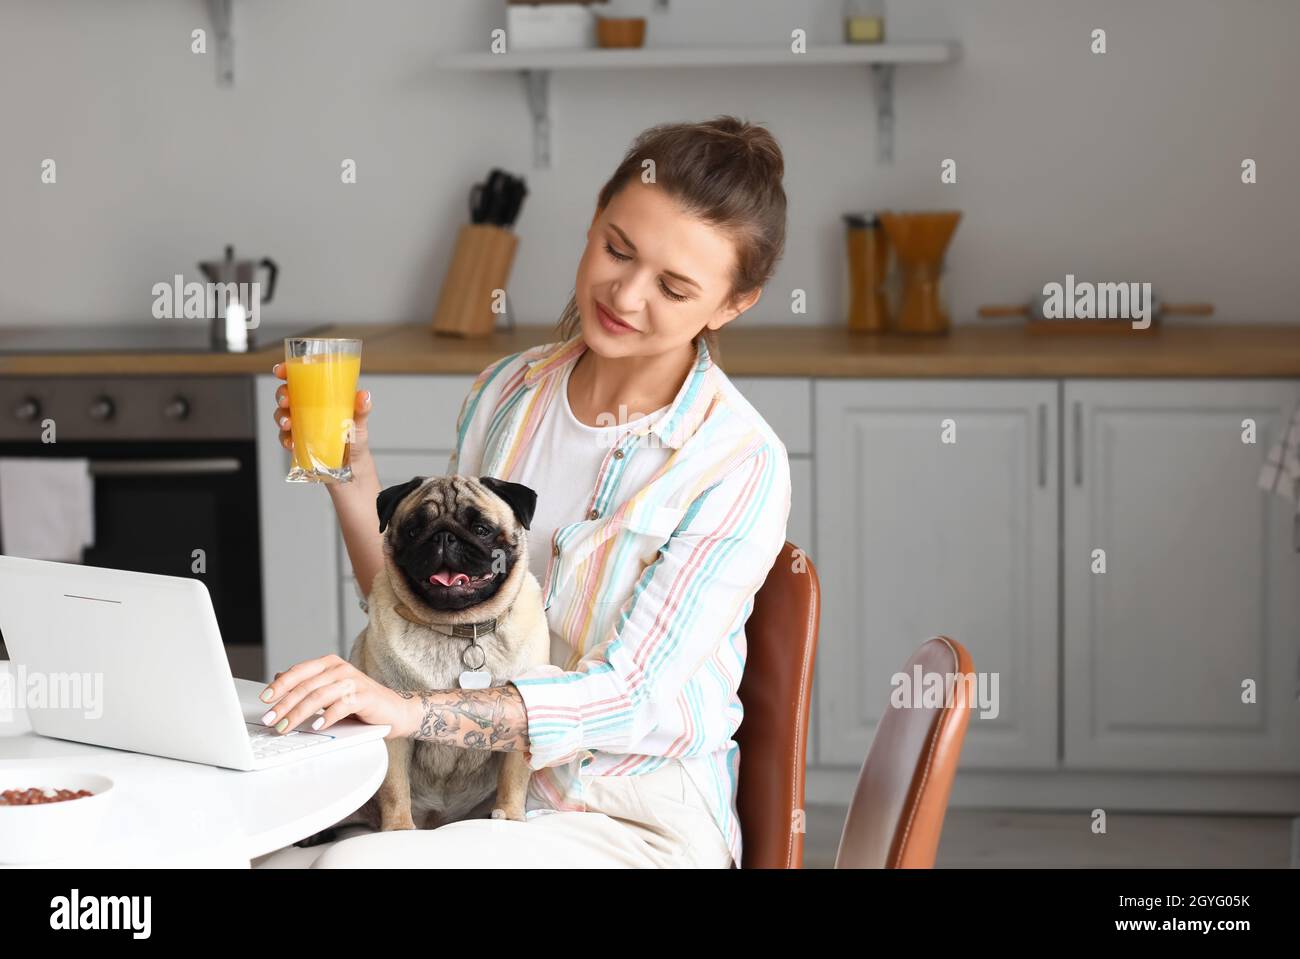 Young woman with cute pug dog drinking juice in kitchen Stock Photo